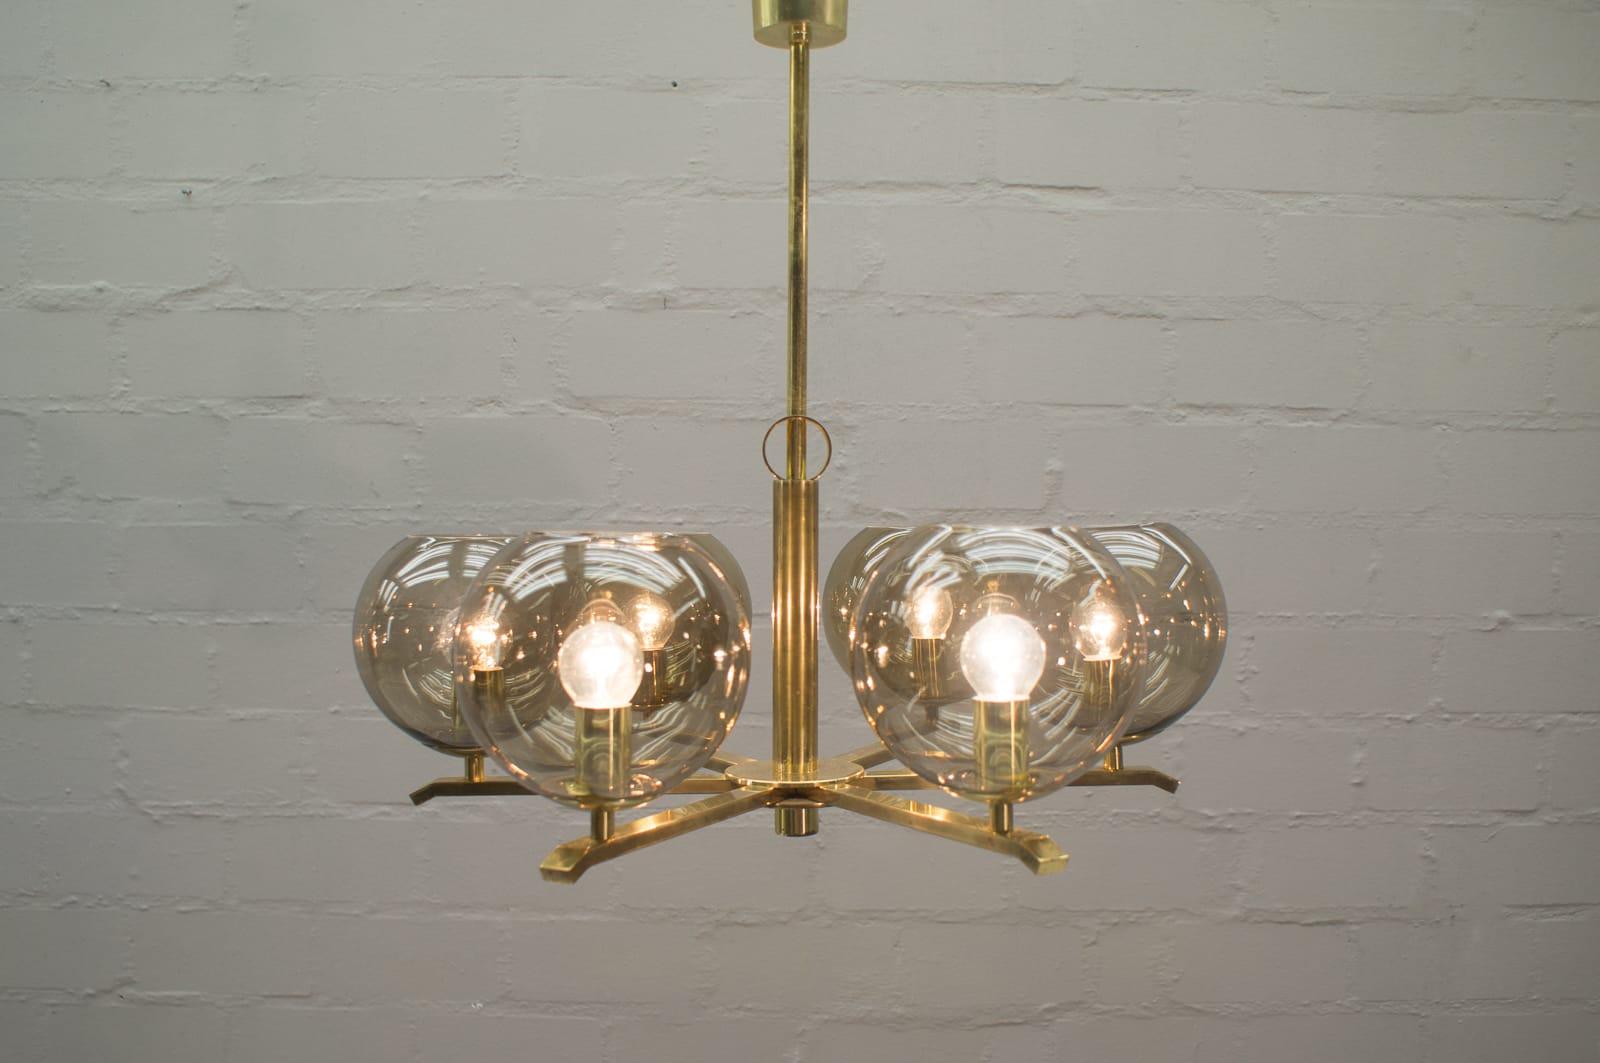 Elegant 1960s Brass Ceiling Lamp with 8 Smoked Glass Globes, Germany For Sale 1